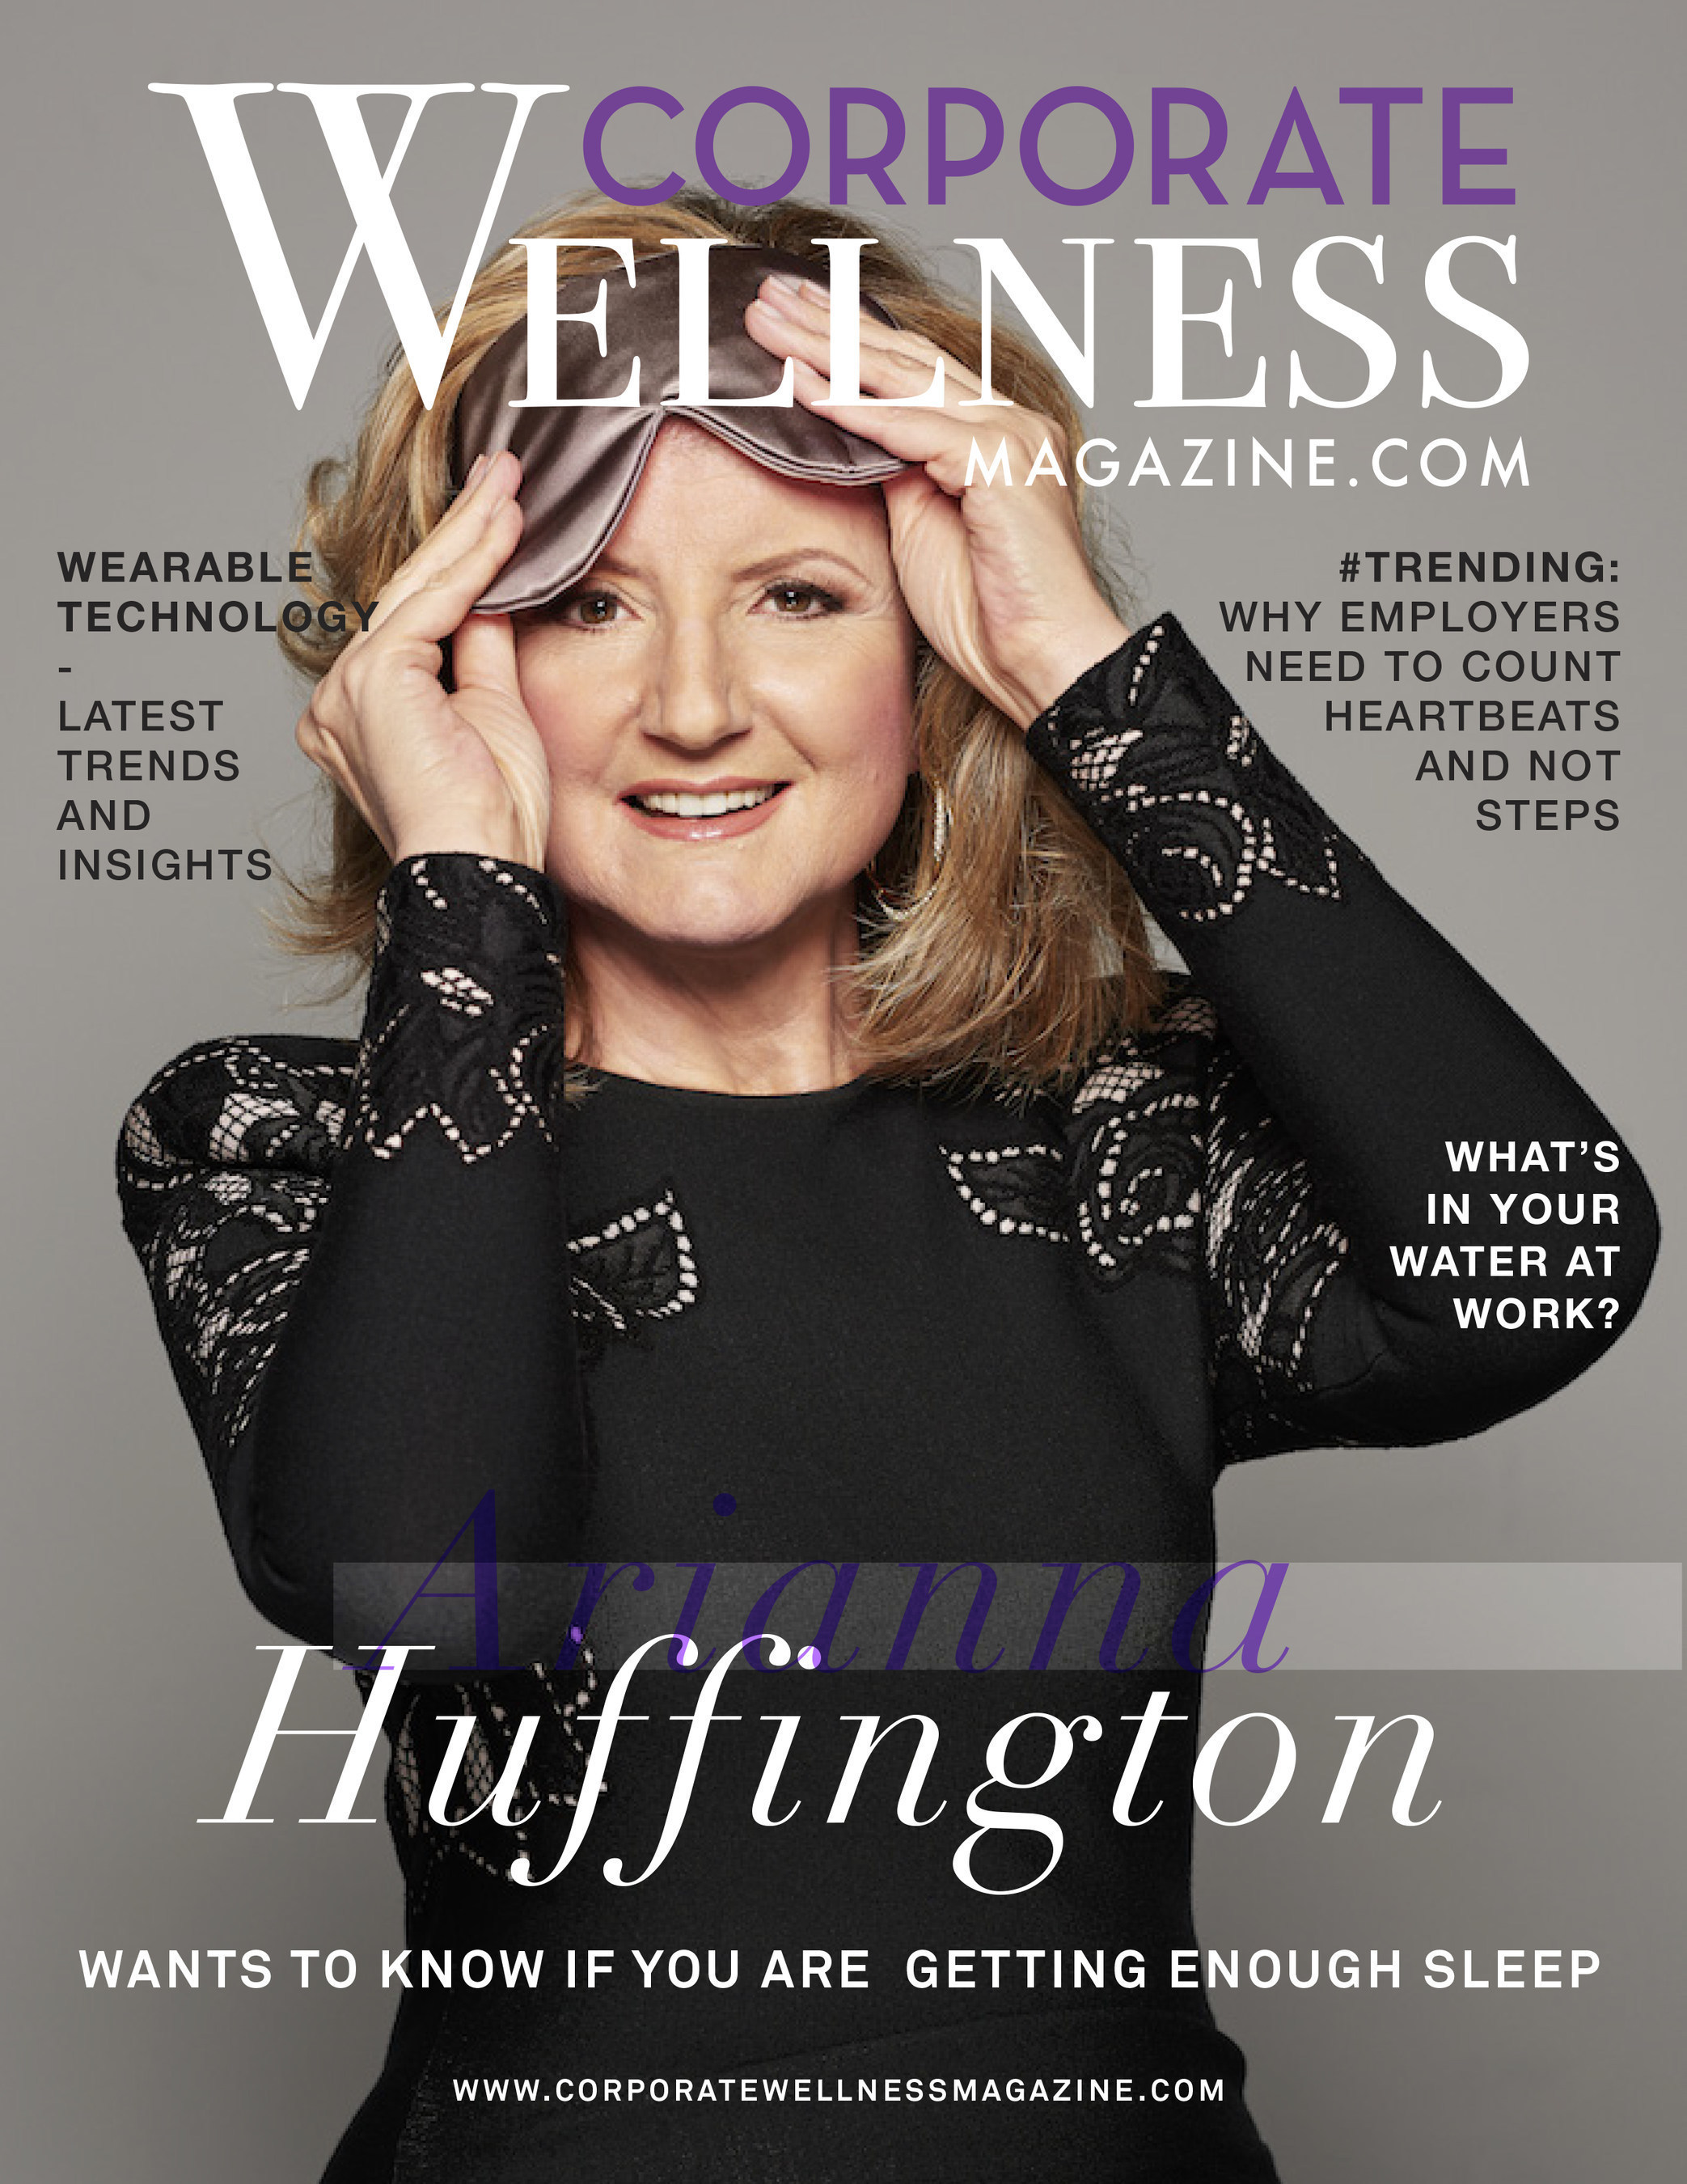 Huffington Post co-founder, Arianna Huffington, is set to discuss "How Sleep is Revolutionizing the Workplace" at the 8th Annual Employer Healthcare & Benefits Congress, Sept. 26-28, 2016, in Washington, D.C.